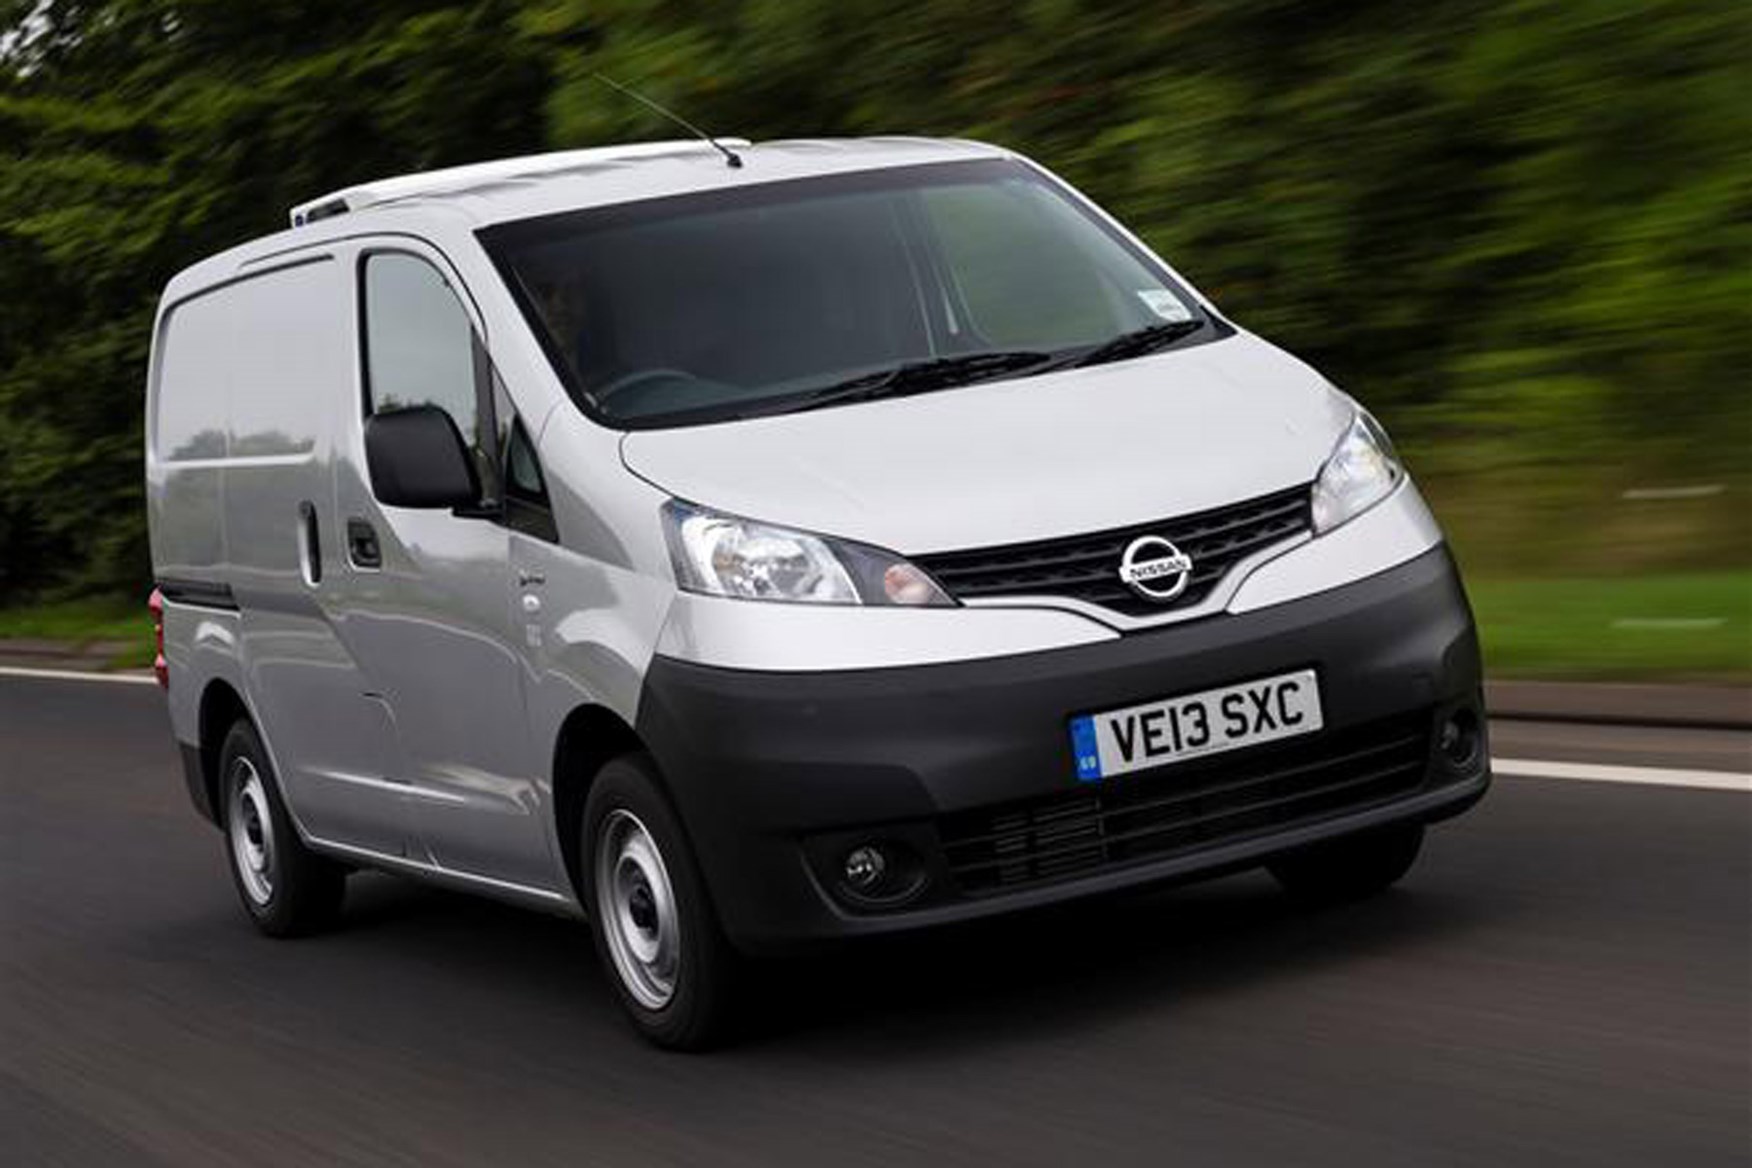 Nissan NV200 full review on Parkers Vans - exterior